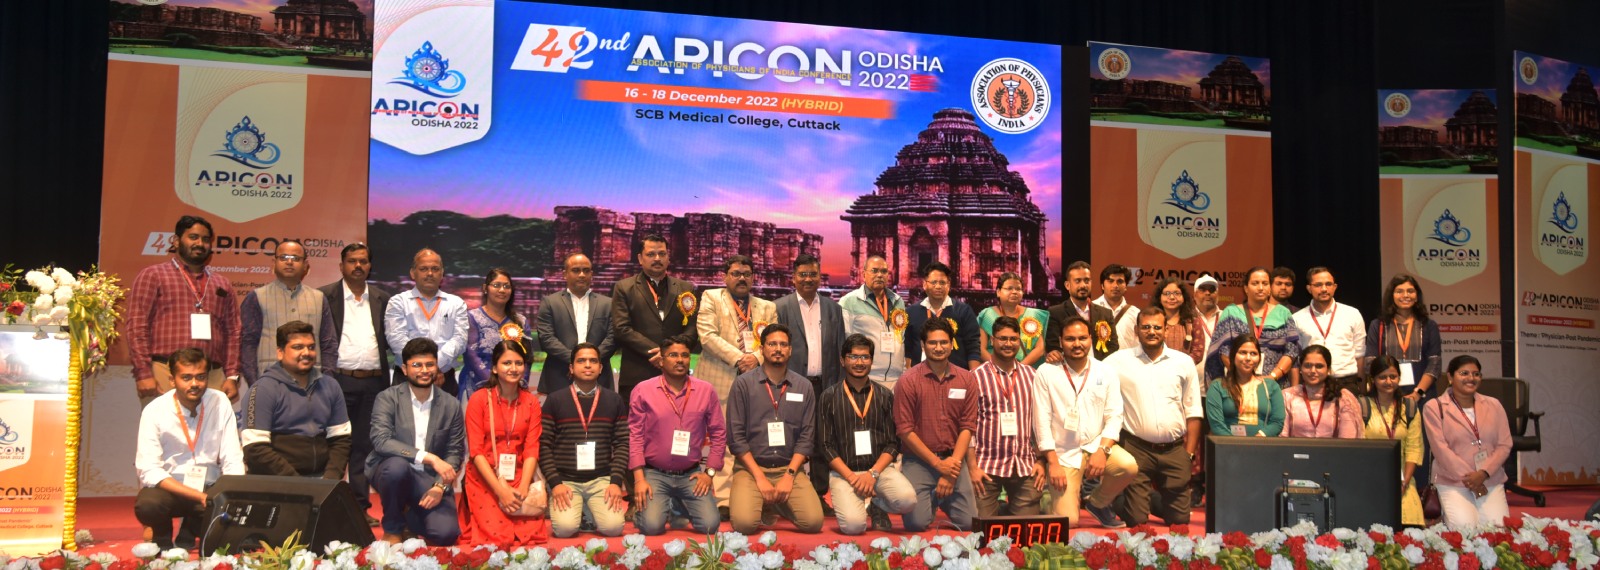 Association of Physicians of India, Odisha State Branch